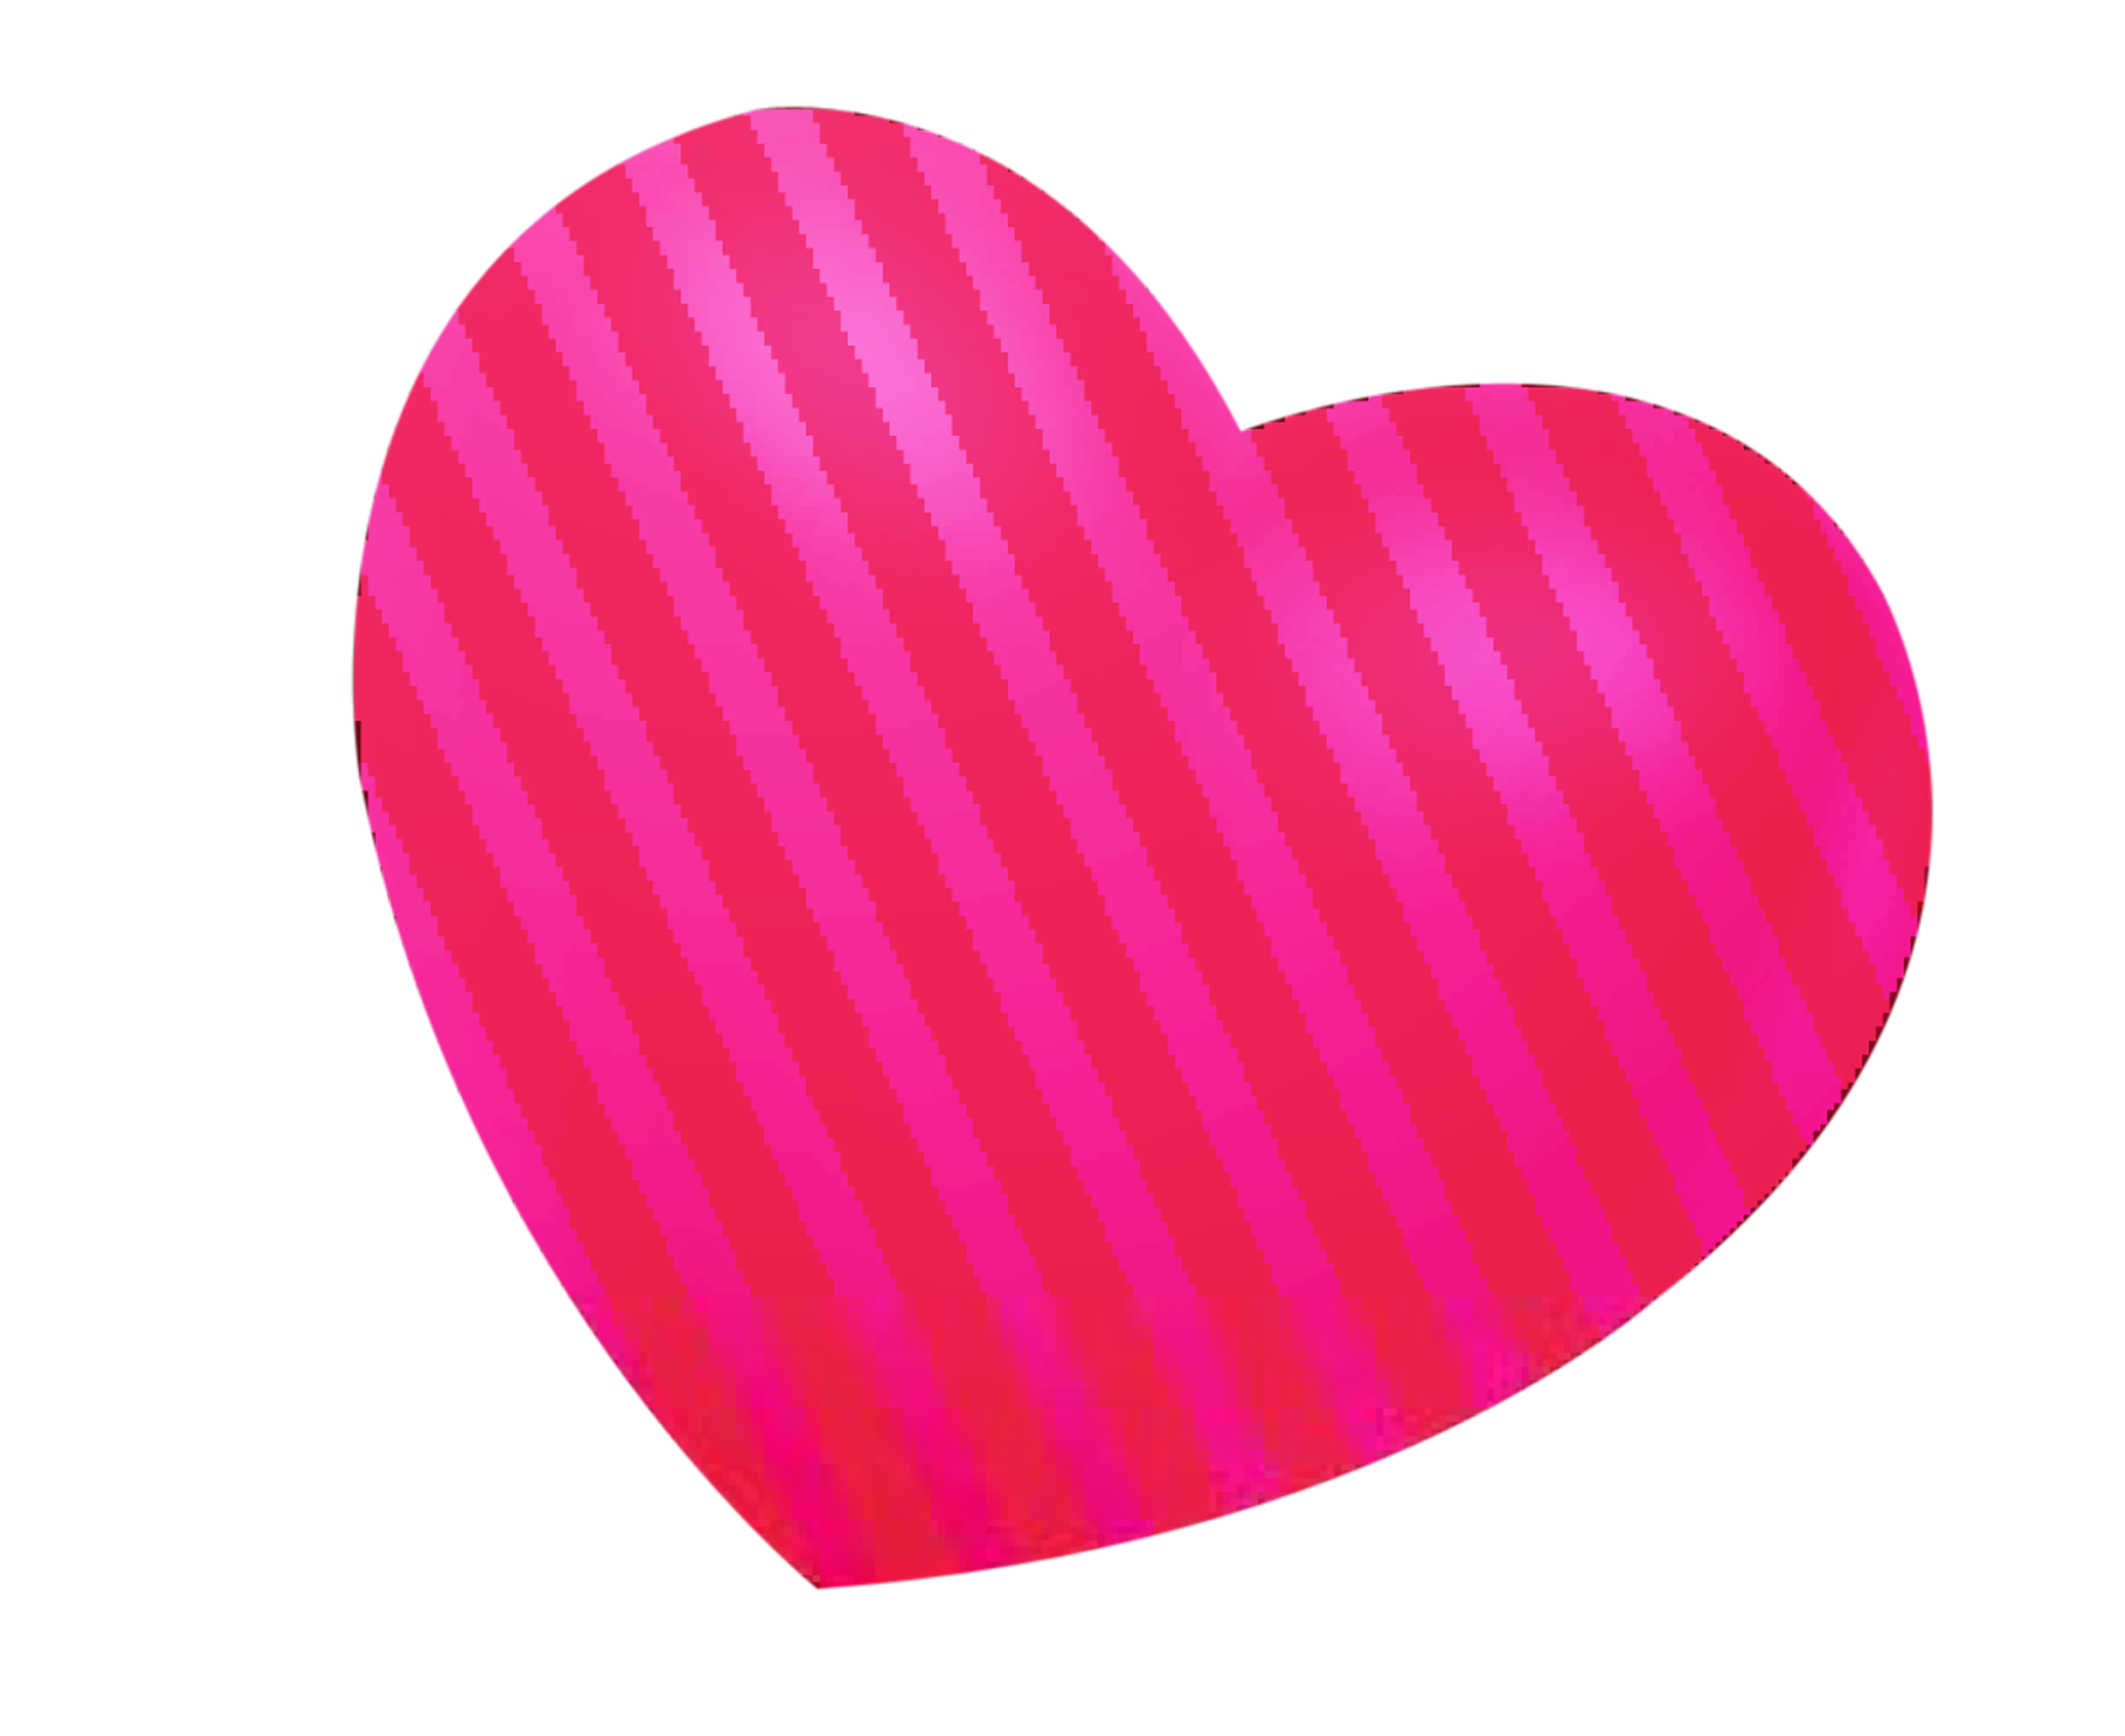 Aesthetic Heart PNG Photos